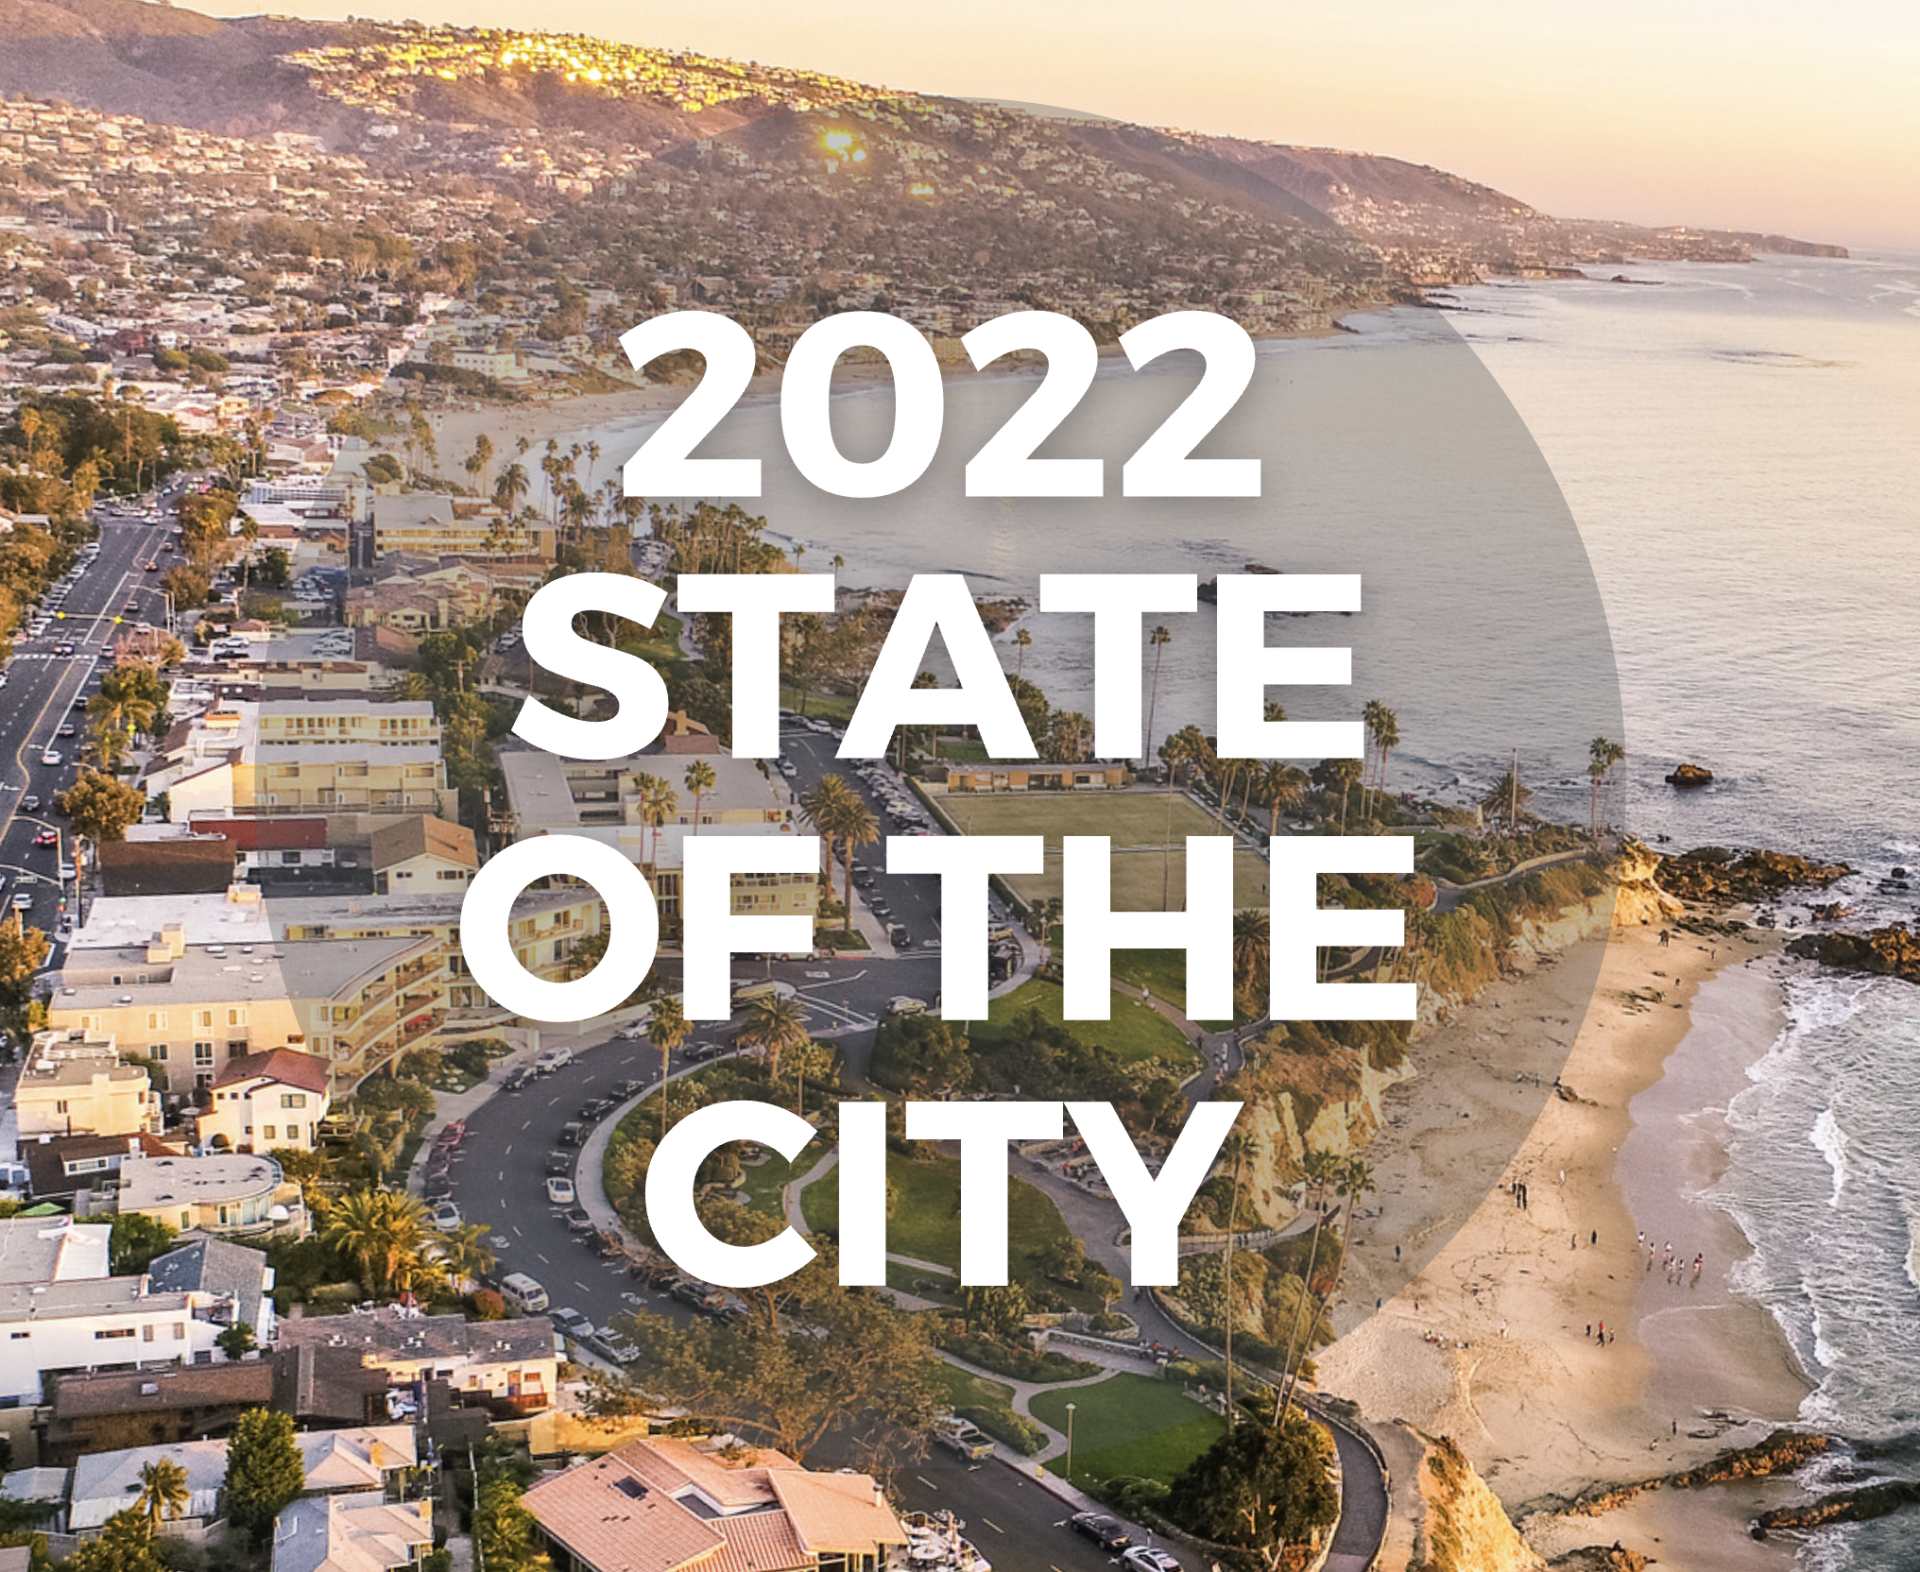 2022 State of the City Title Edited